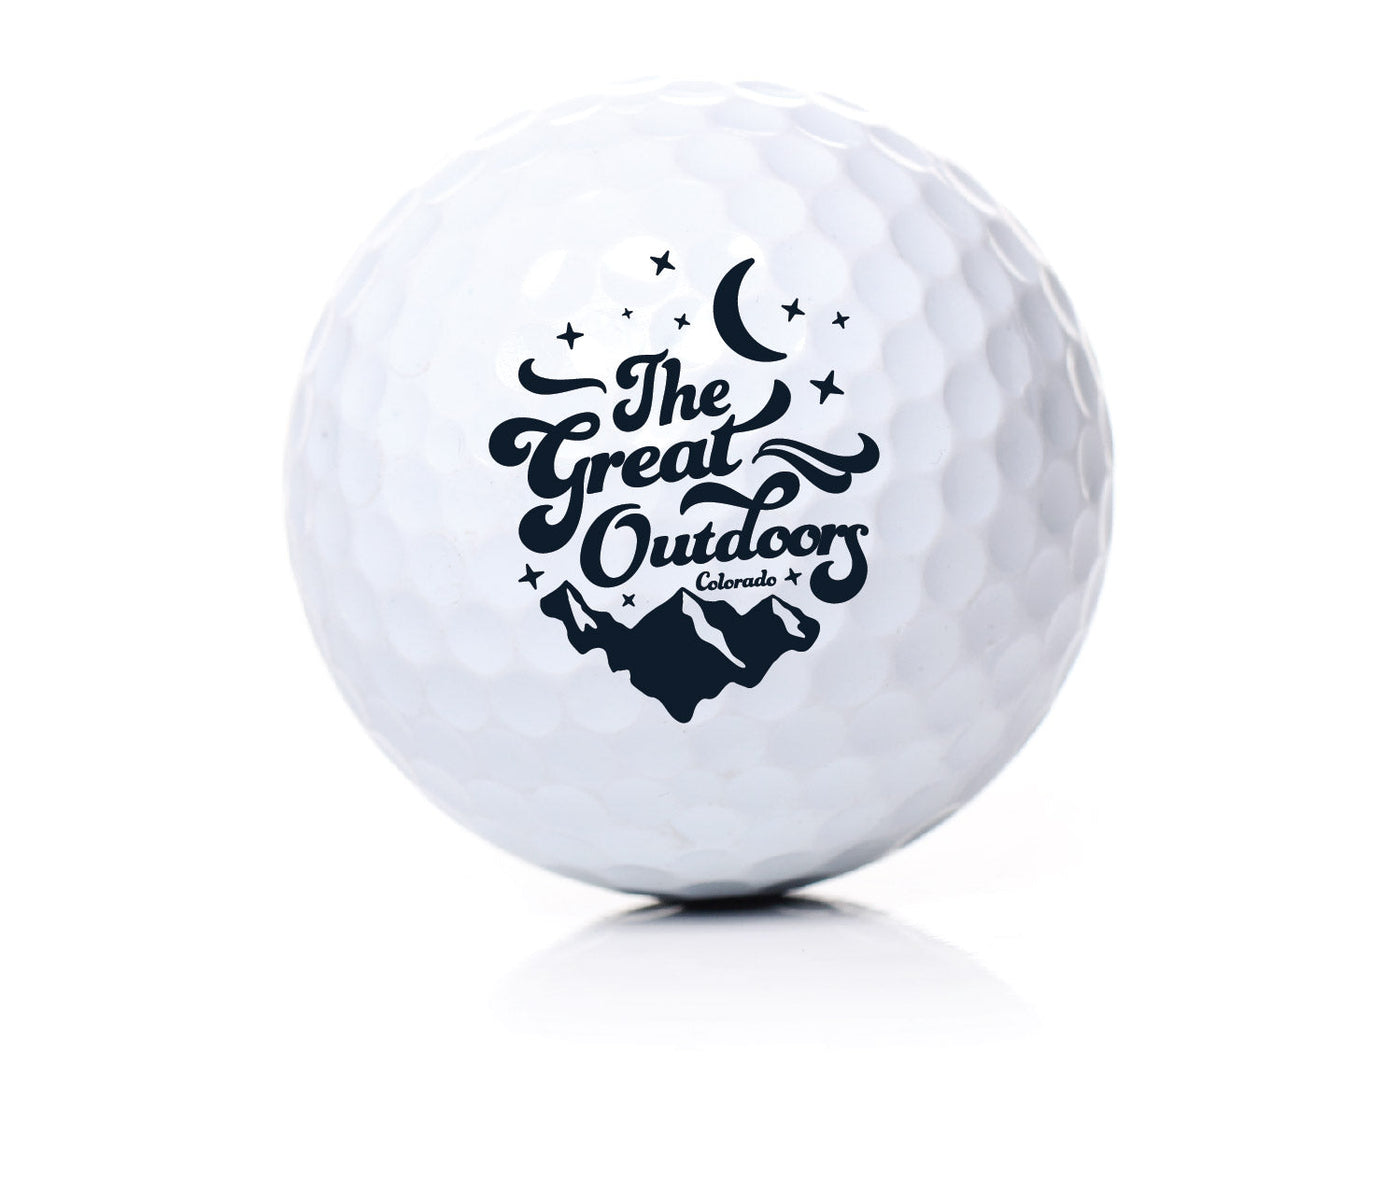 The Great Outdoors Novelty Golf Ball